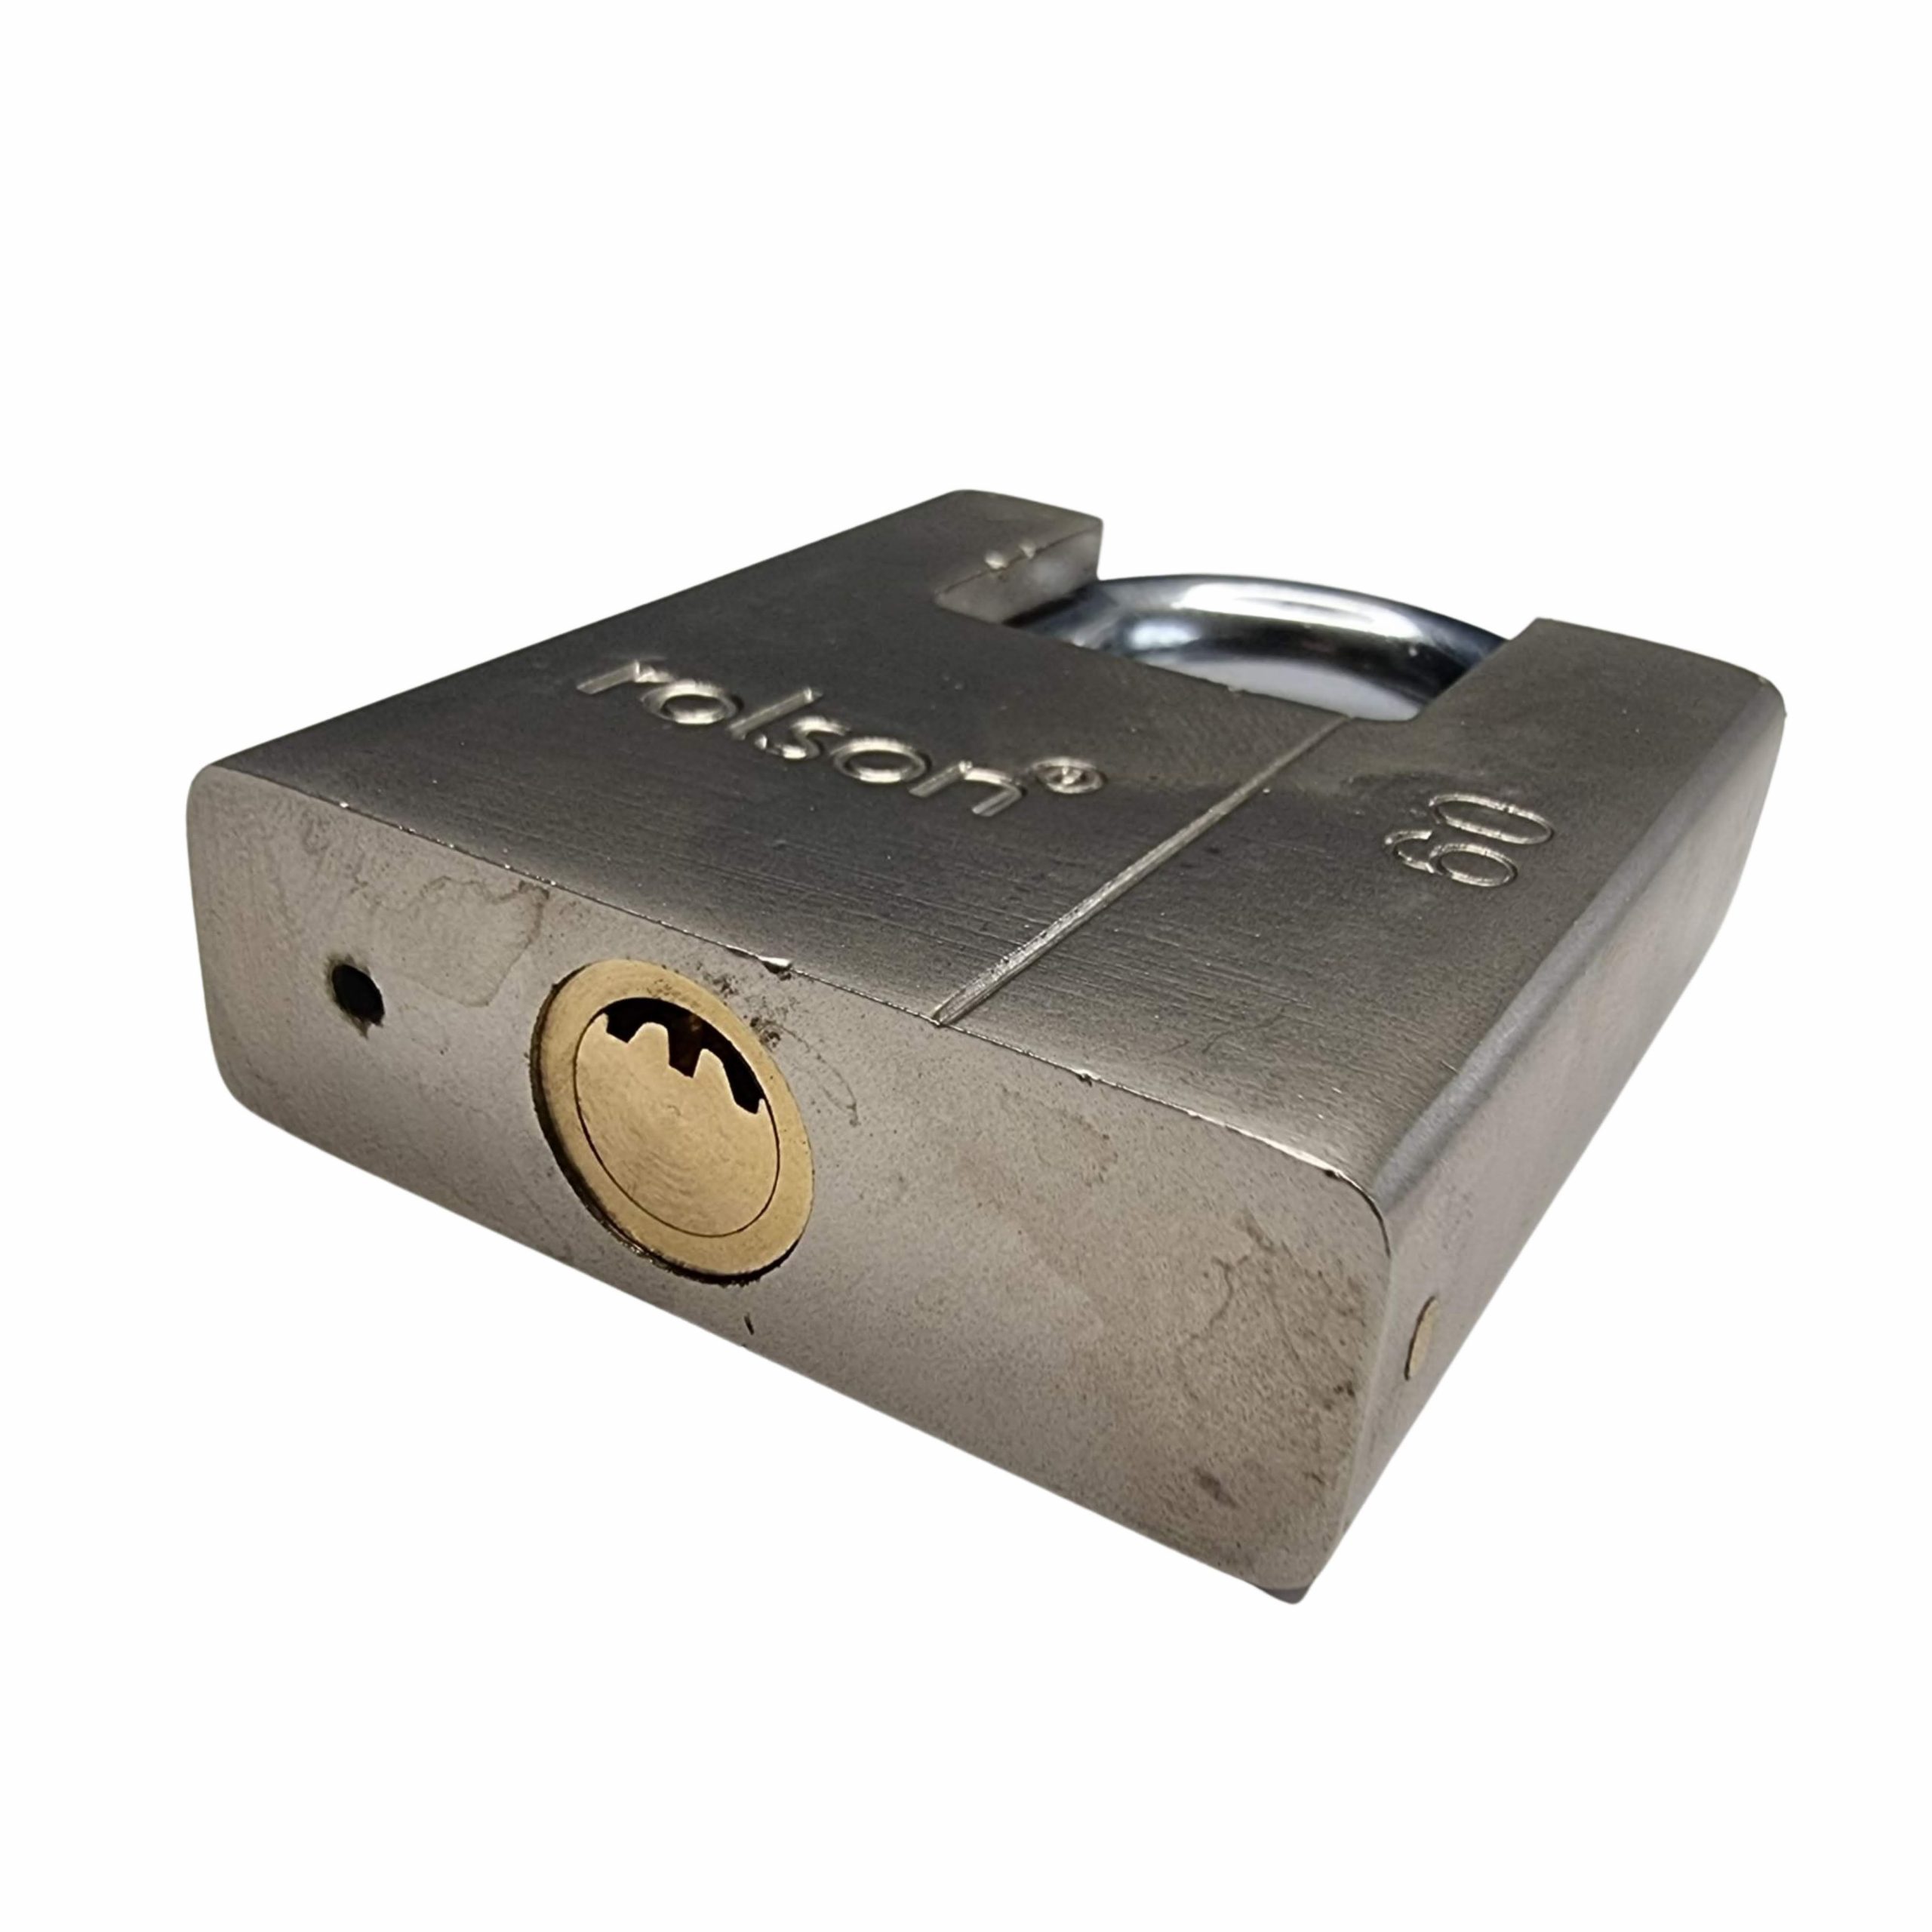 60mm Heavy Duty Hardened Steel Body Padlock 66479 with 4 keys and High  sided protective shoulders for extra security